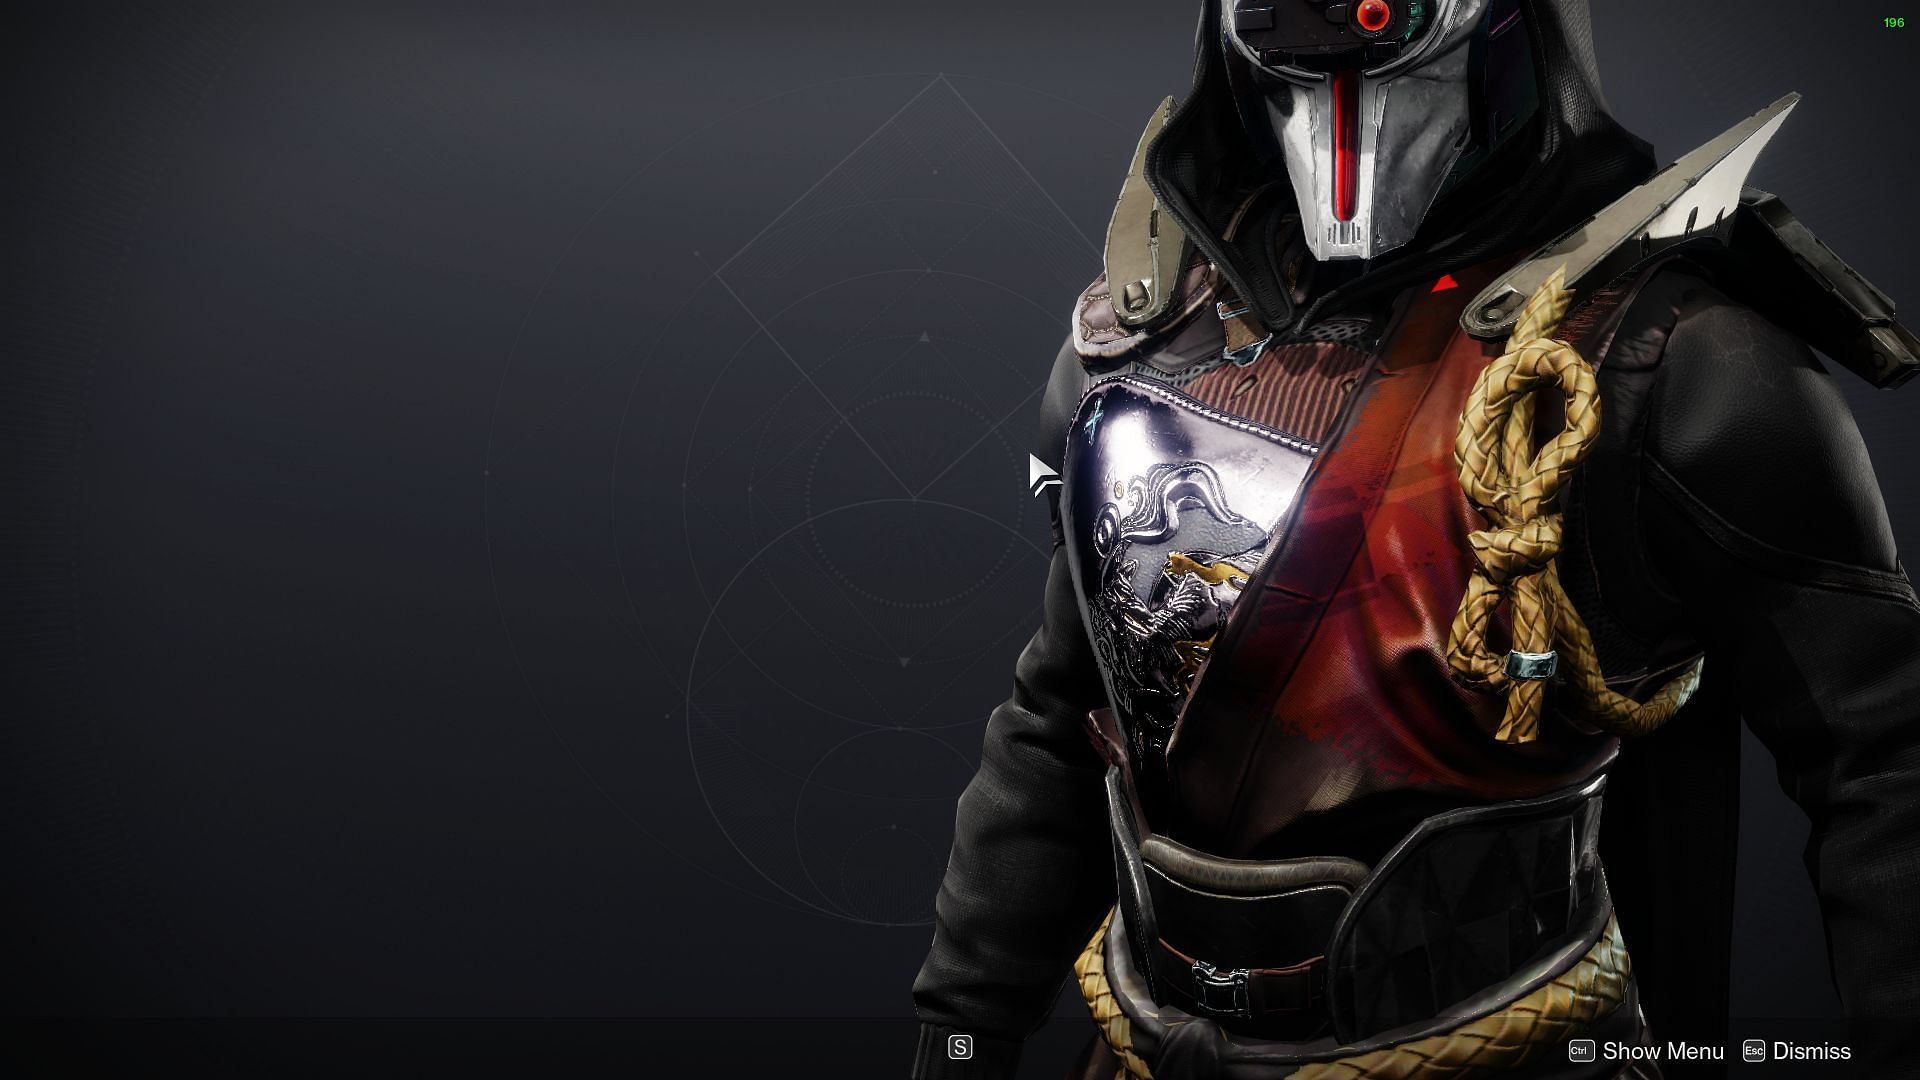 The Sixth Coyote (Image via Bungie)